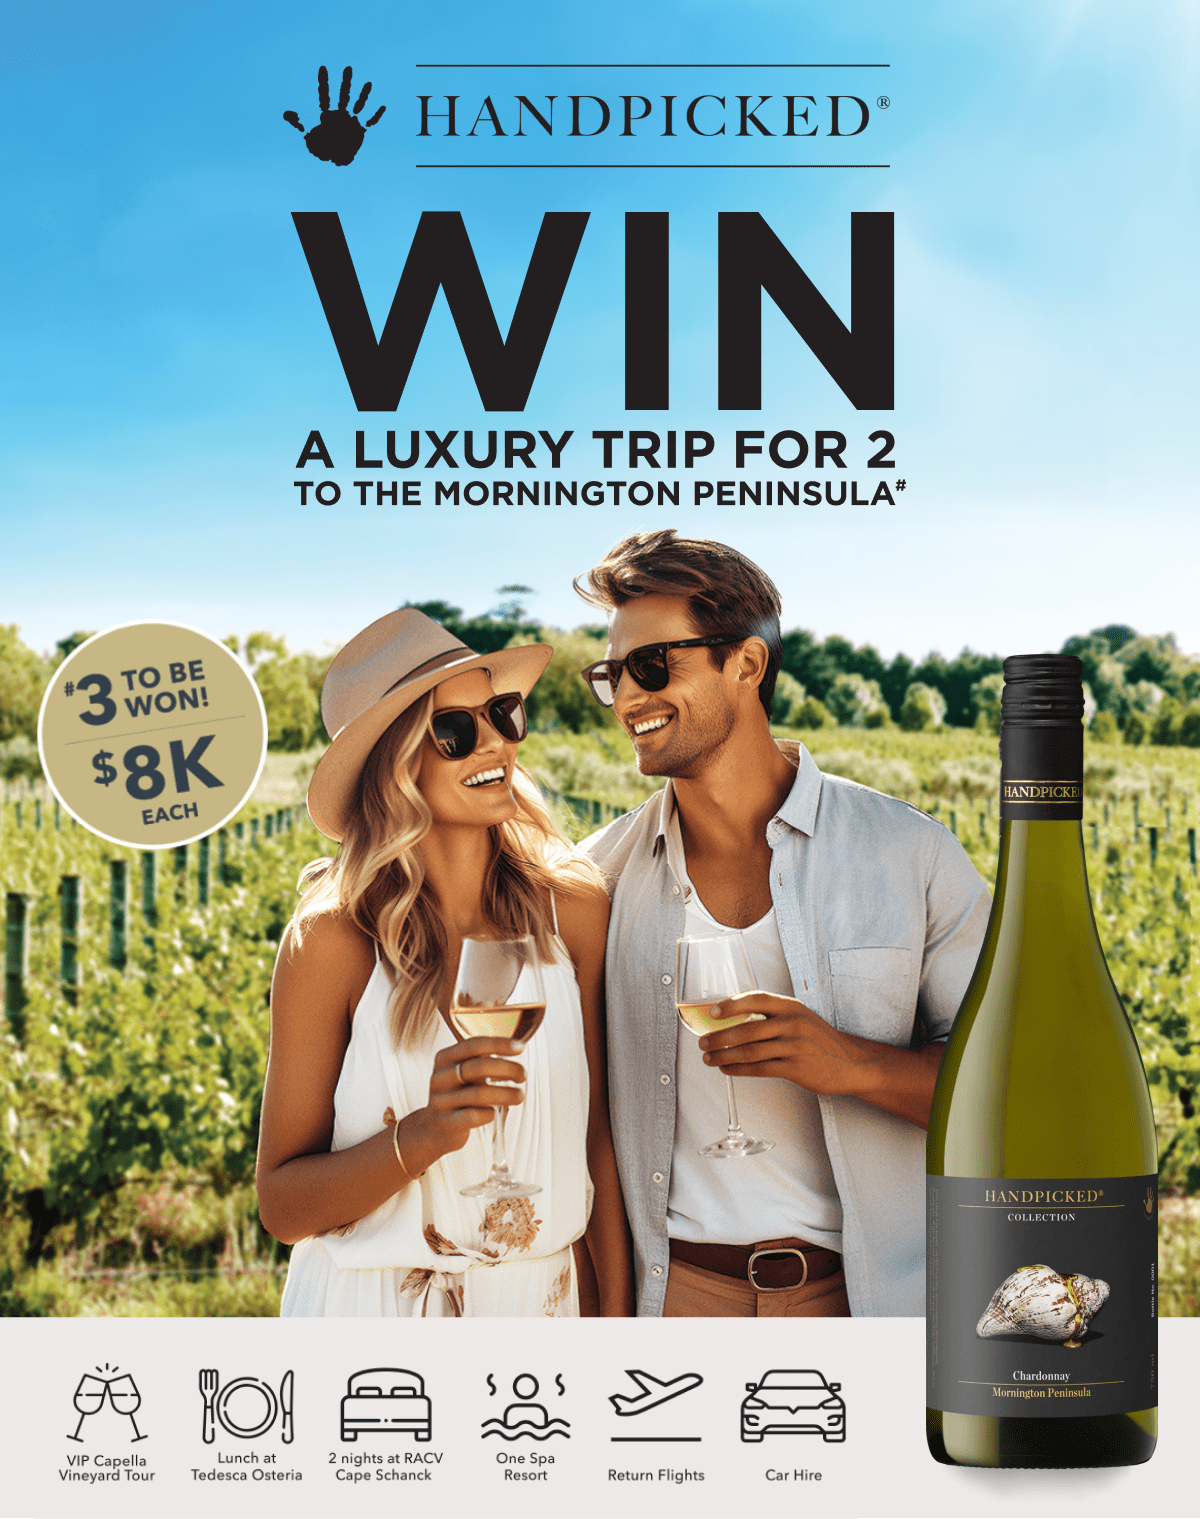 WIN A LUXURY TRIP FOR 2 TO THE MORNINGTON PENINSULA